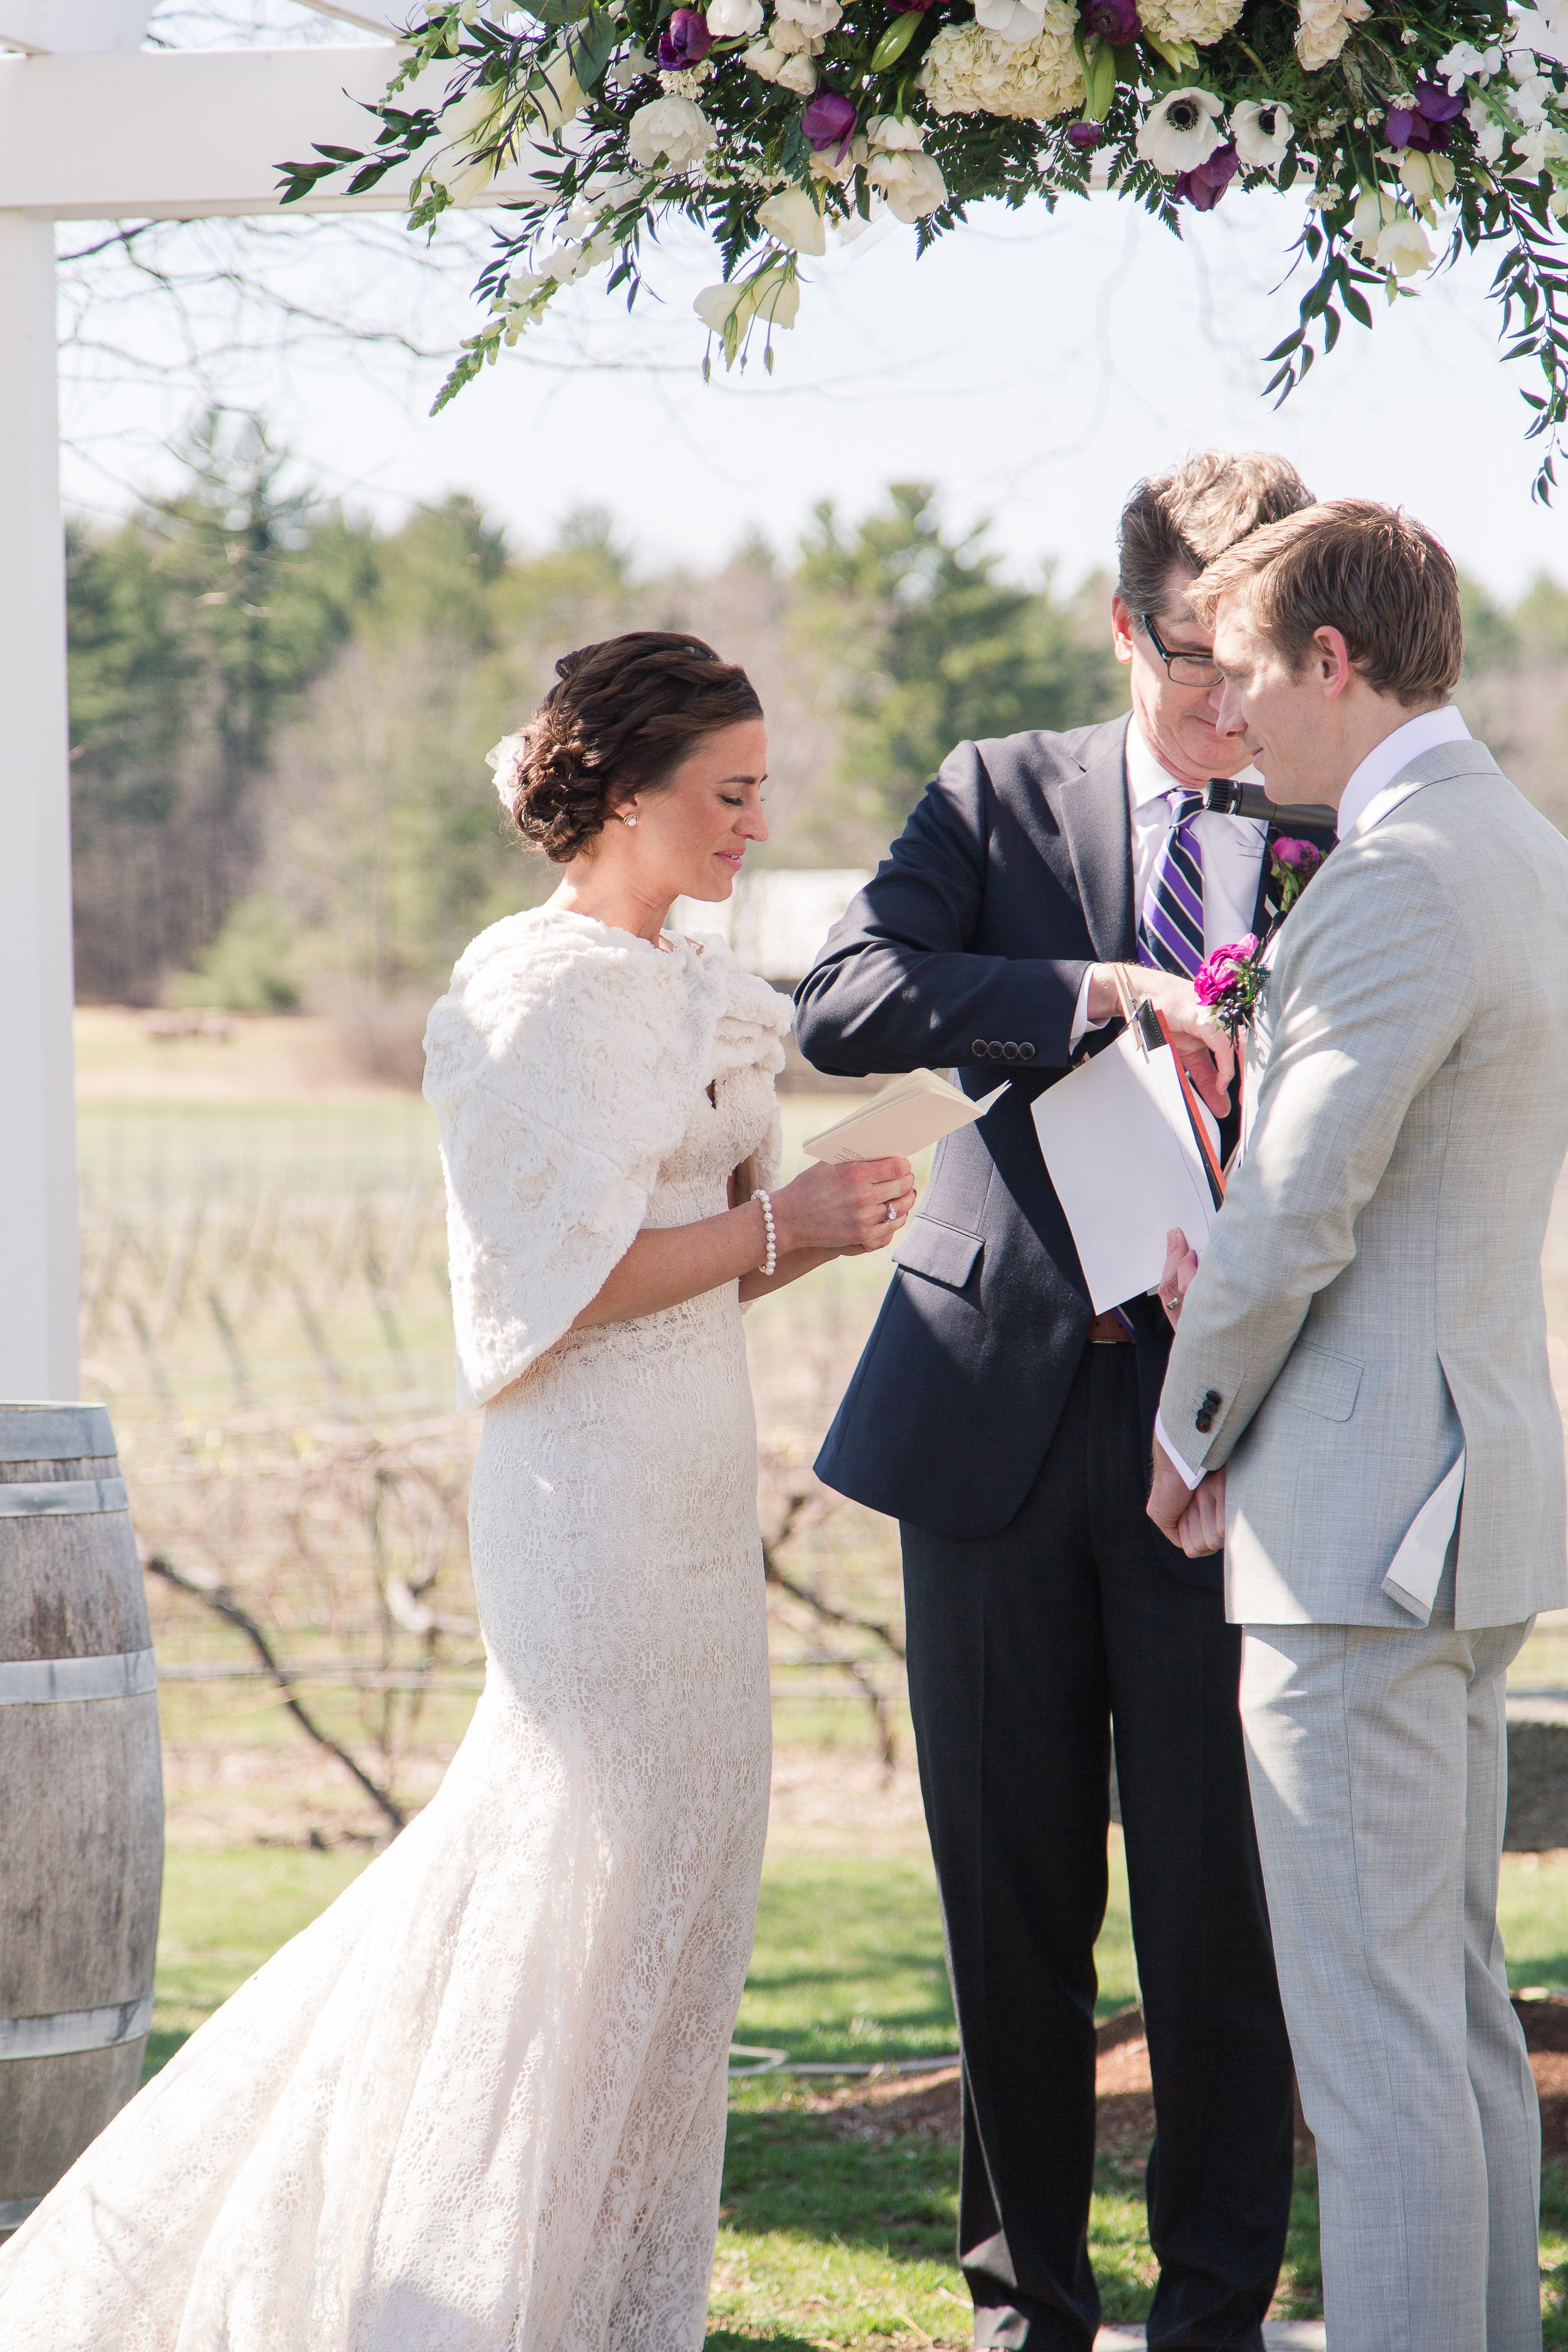 Seacoast New Hampshire Wedding Photographer | flag hill winery and distillery wedding venue | lee, nh | amy brown photography